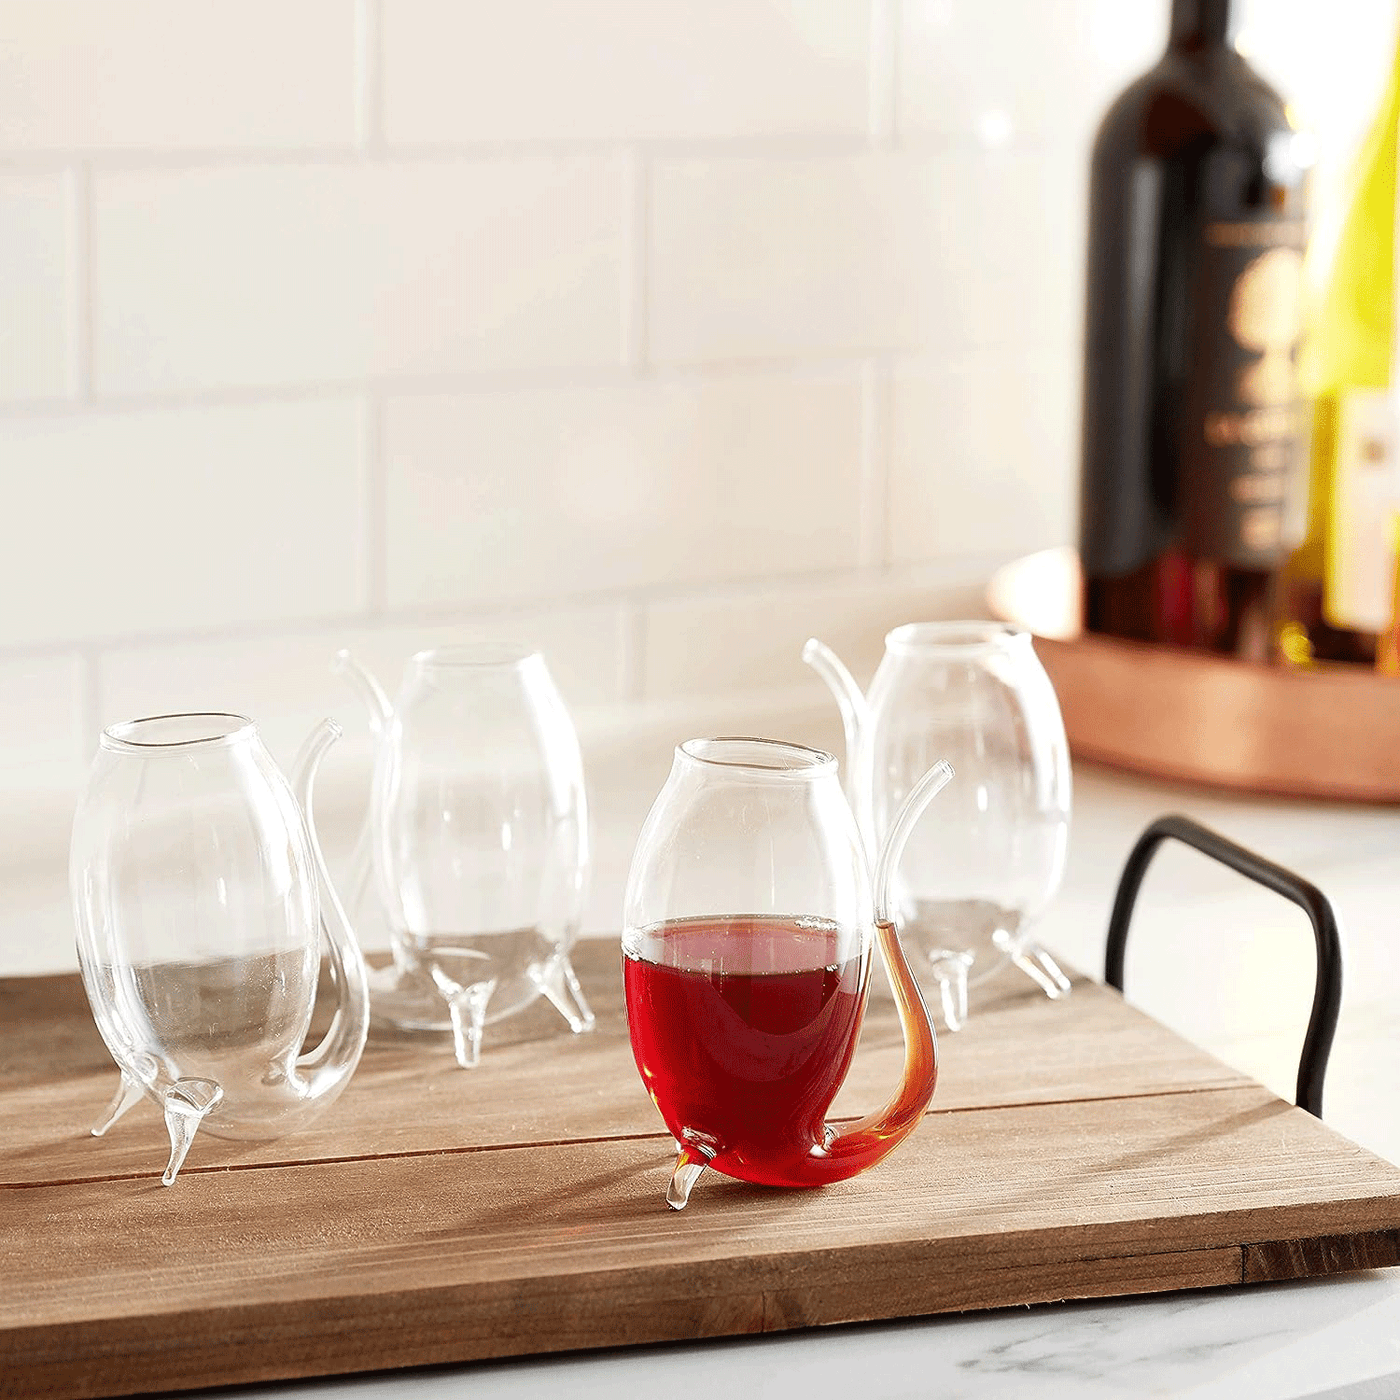 Set of 4 Port Sippers